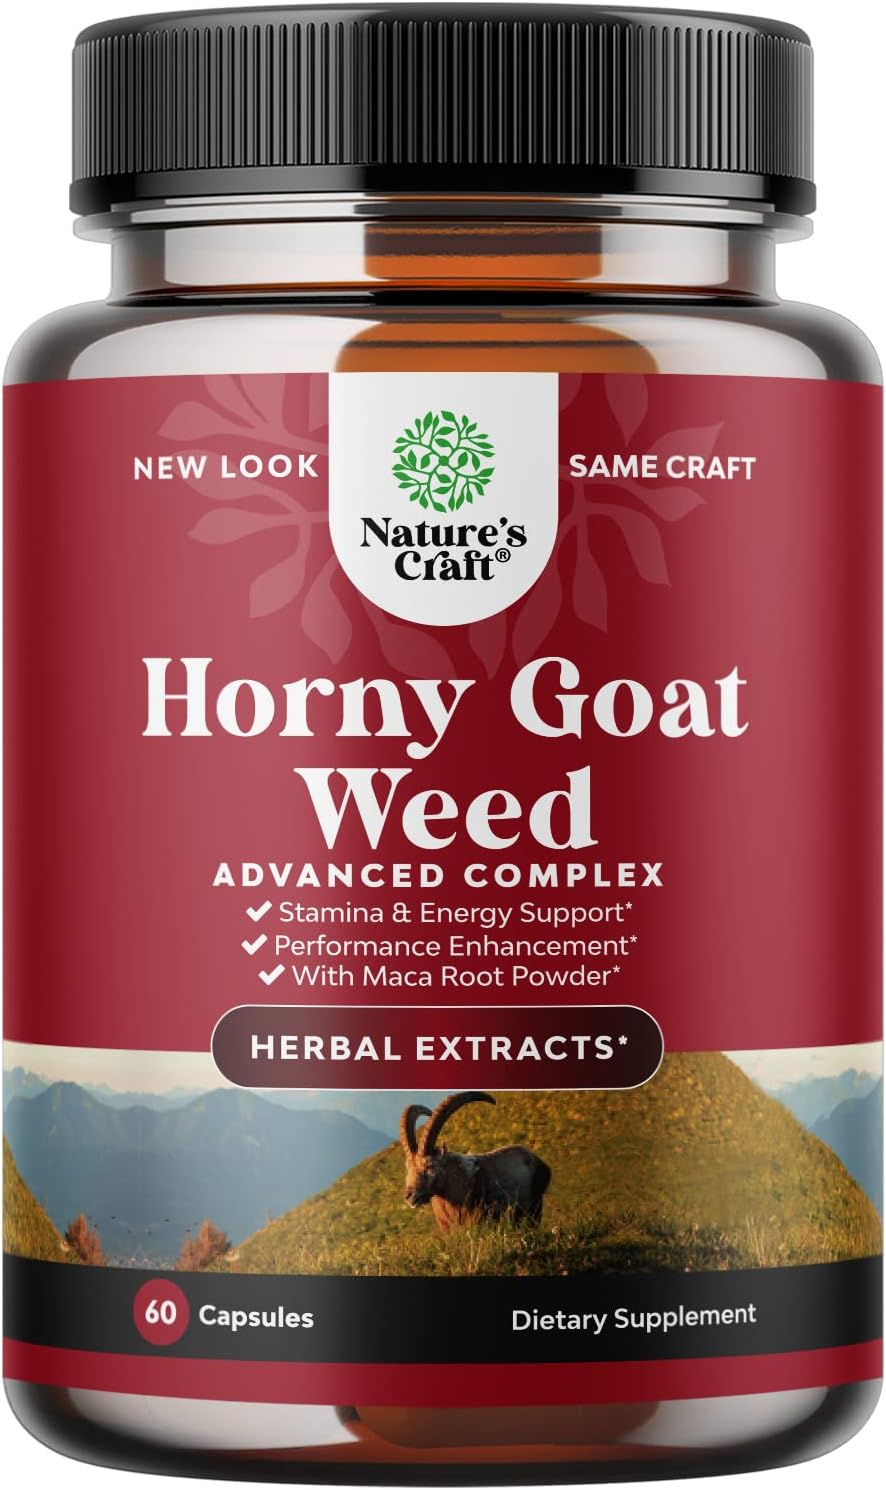 Horny Goat Weed for Male Enhan…